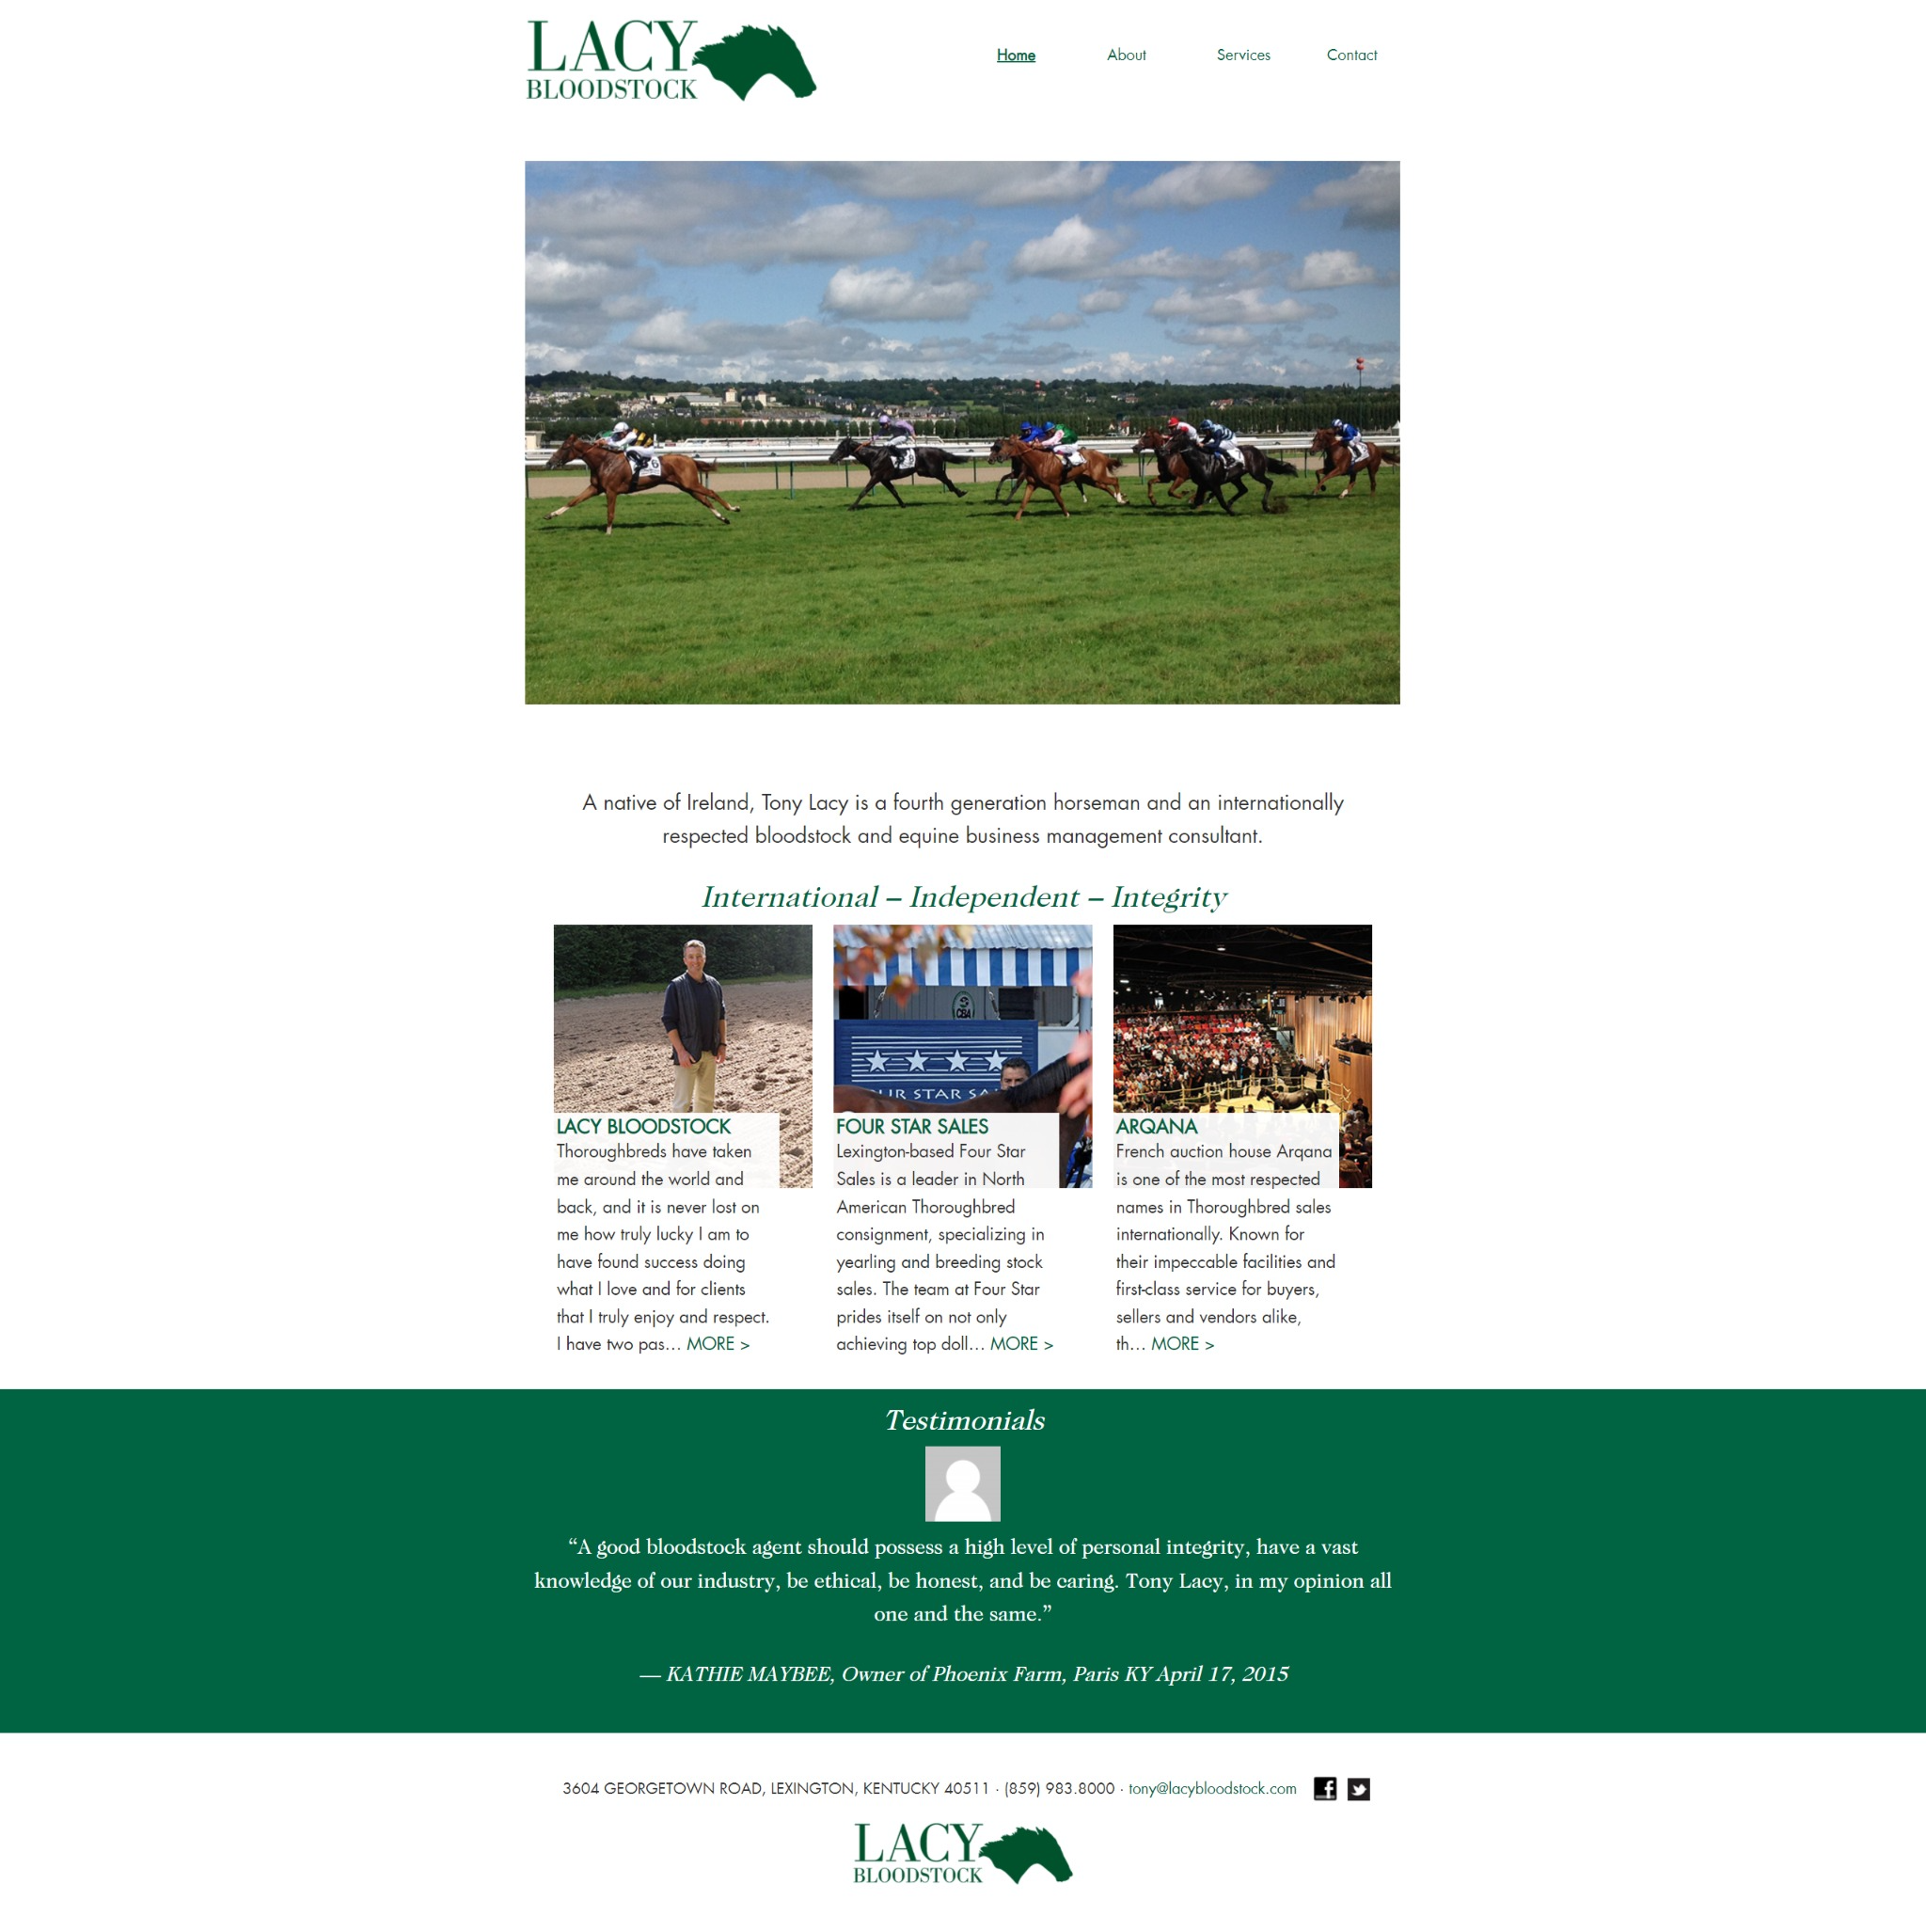 Designed a responsive WordPress theme for lacybloodstock.com